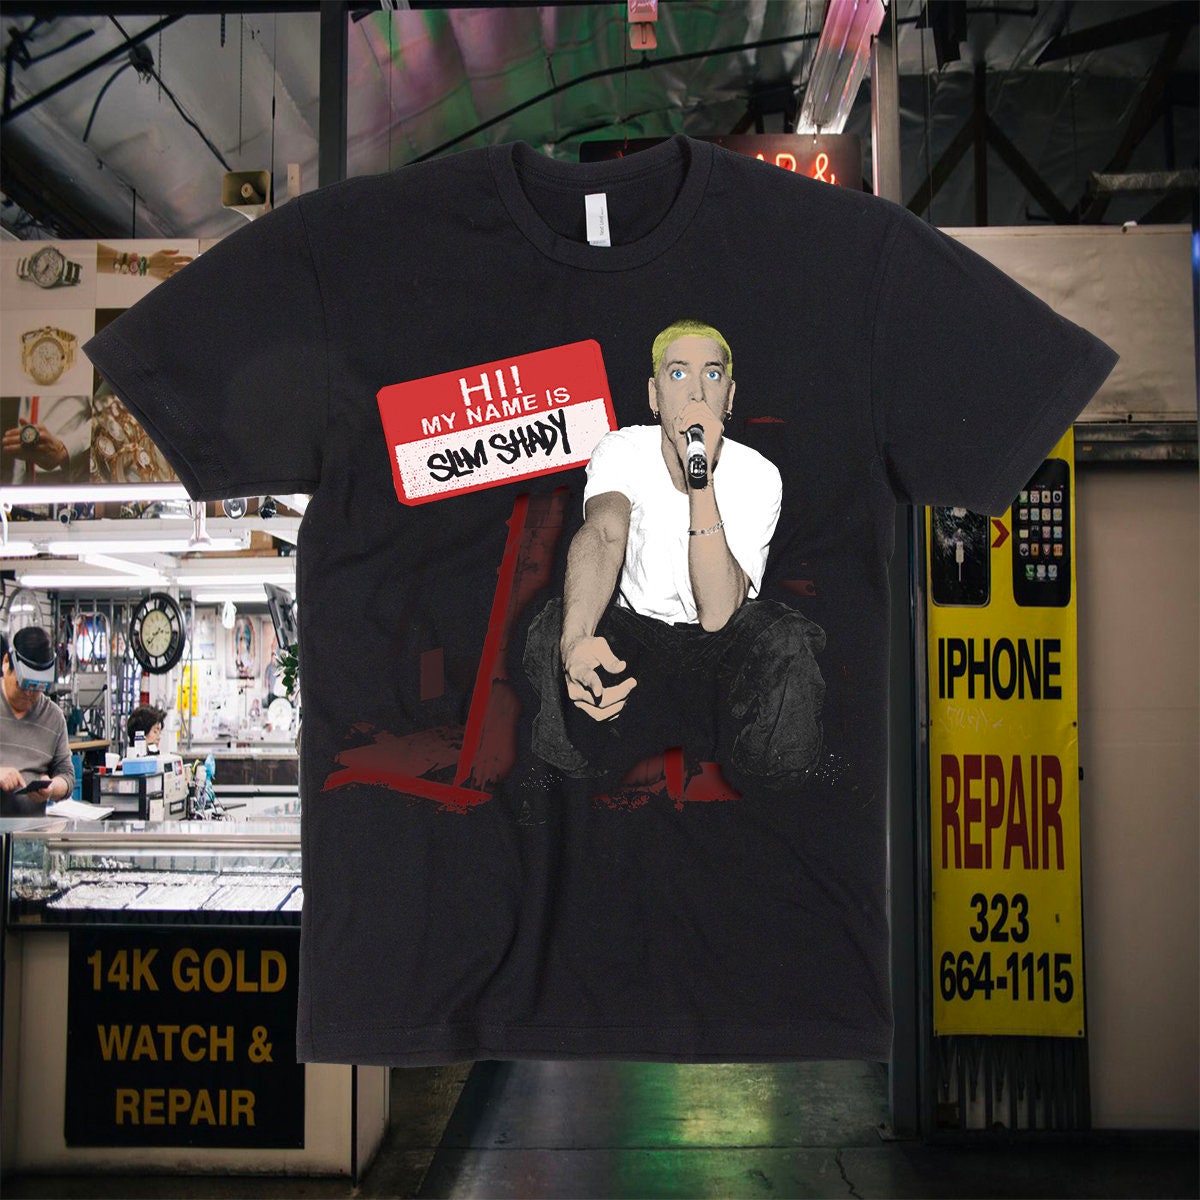 The t-shirt Onyx Bacdafucup by Eminem in The Defiant Ones S01E04